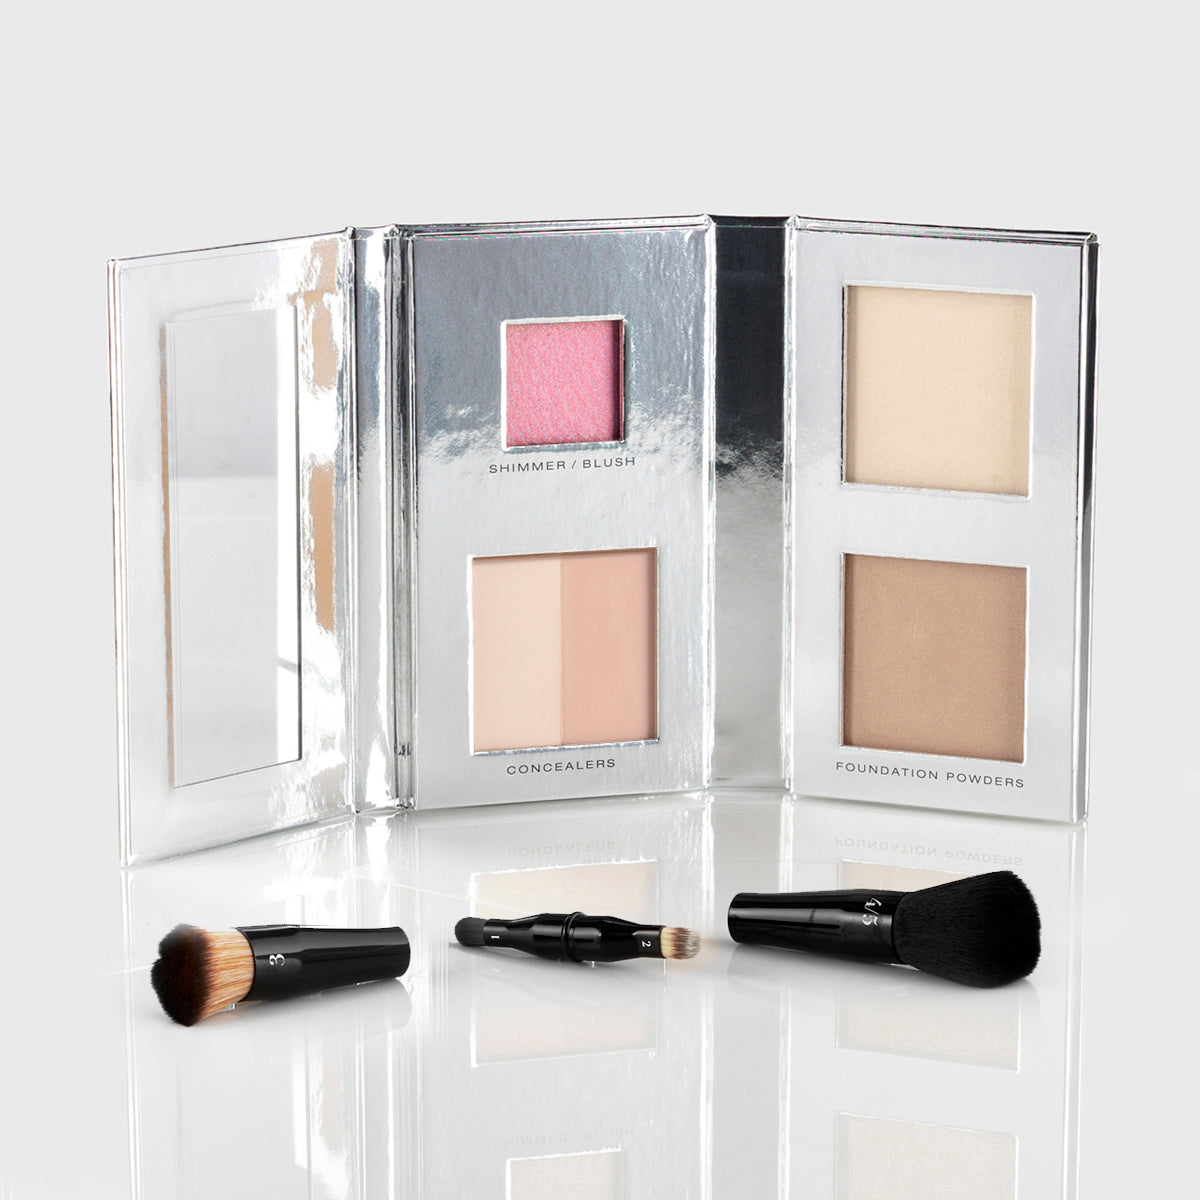 a silver makeup palette with mirrored flap and 1 blush, 2 concealers and 2 foundation powers in light shades; a black, travel-sized nesting brush set is splayed out in front of the palette